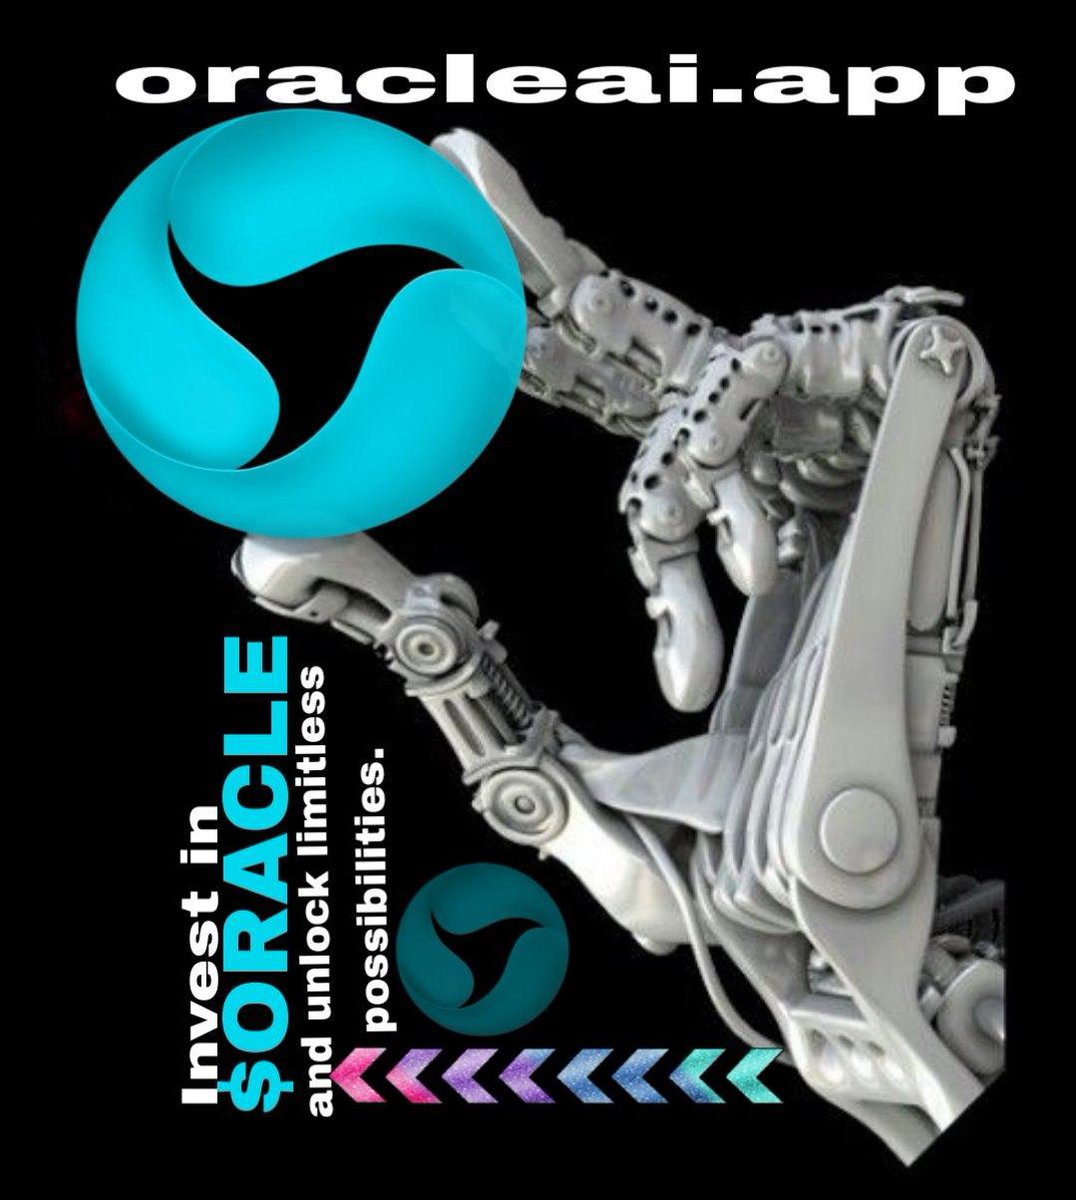 Ready to take your trading to the next level? Stake $ORACLE tokens and access exclusive data for a competitive advantage. #OracleAI ❄️❄️❄️❄️ Reach out to us: @oracleai_erc 🚀🚀🚀🚀 #AI #ETH #Uniswap #Cryptomarket #Newtoken #EMArmy